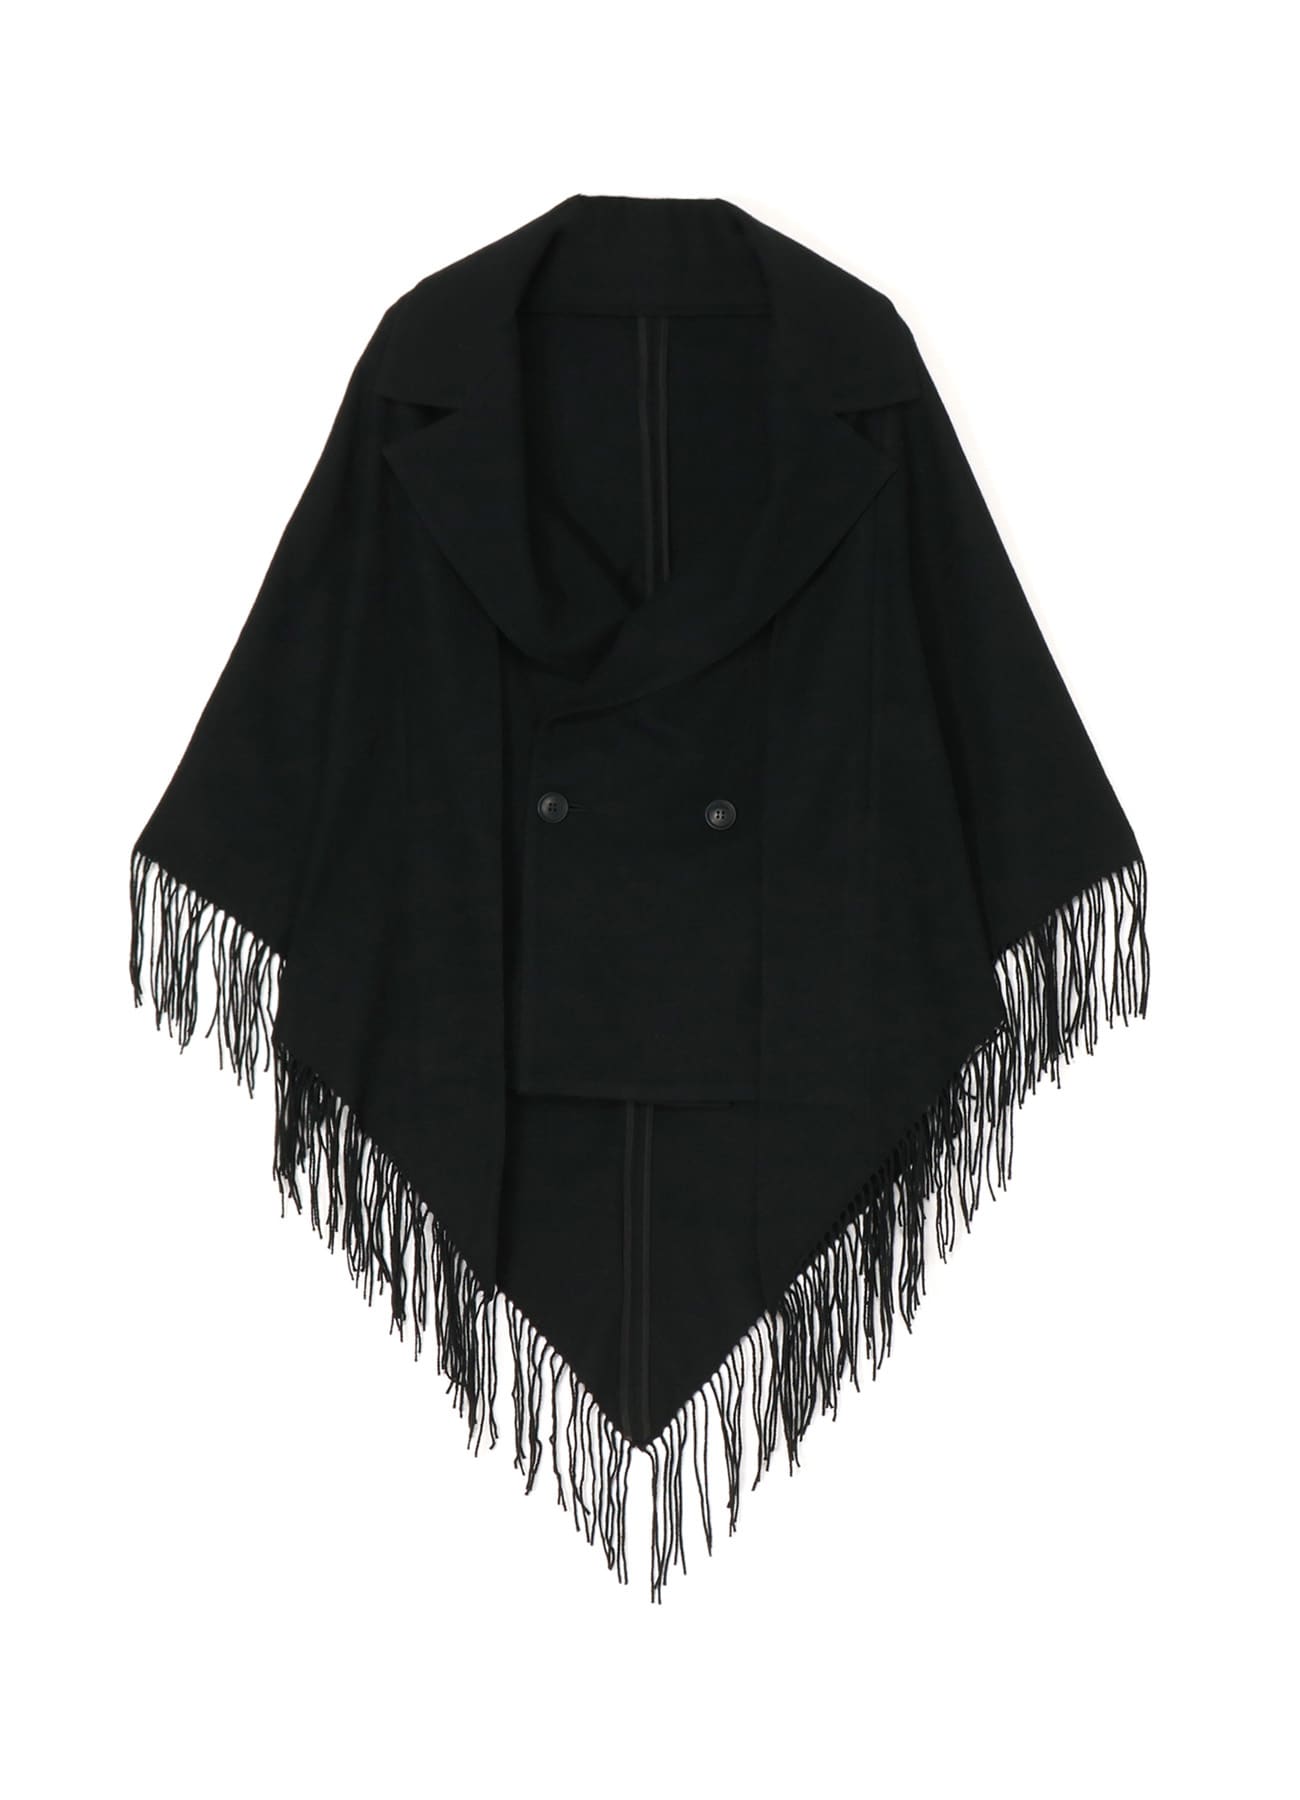 CAPE-STYLE DOUBLE BUTTON SERGE JACKET WITH FRINGE DETAIL